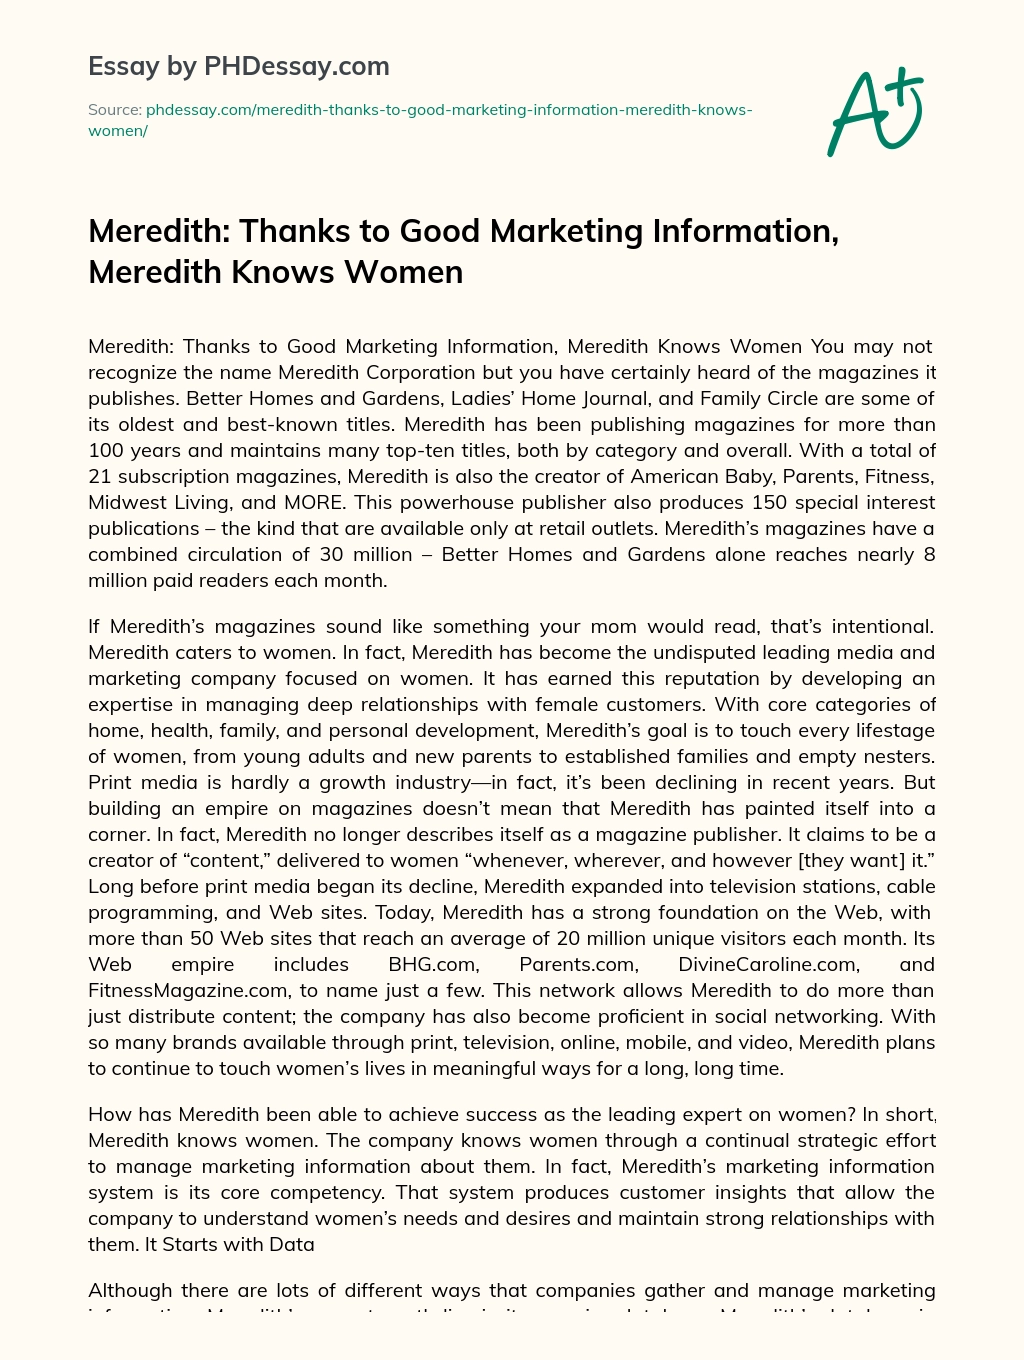 Meredith: Thanks to Good Marketing Information, Meredith Knows Women essay